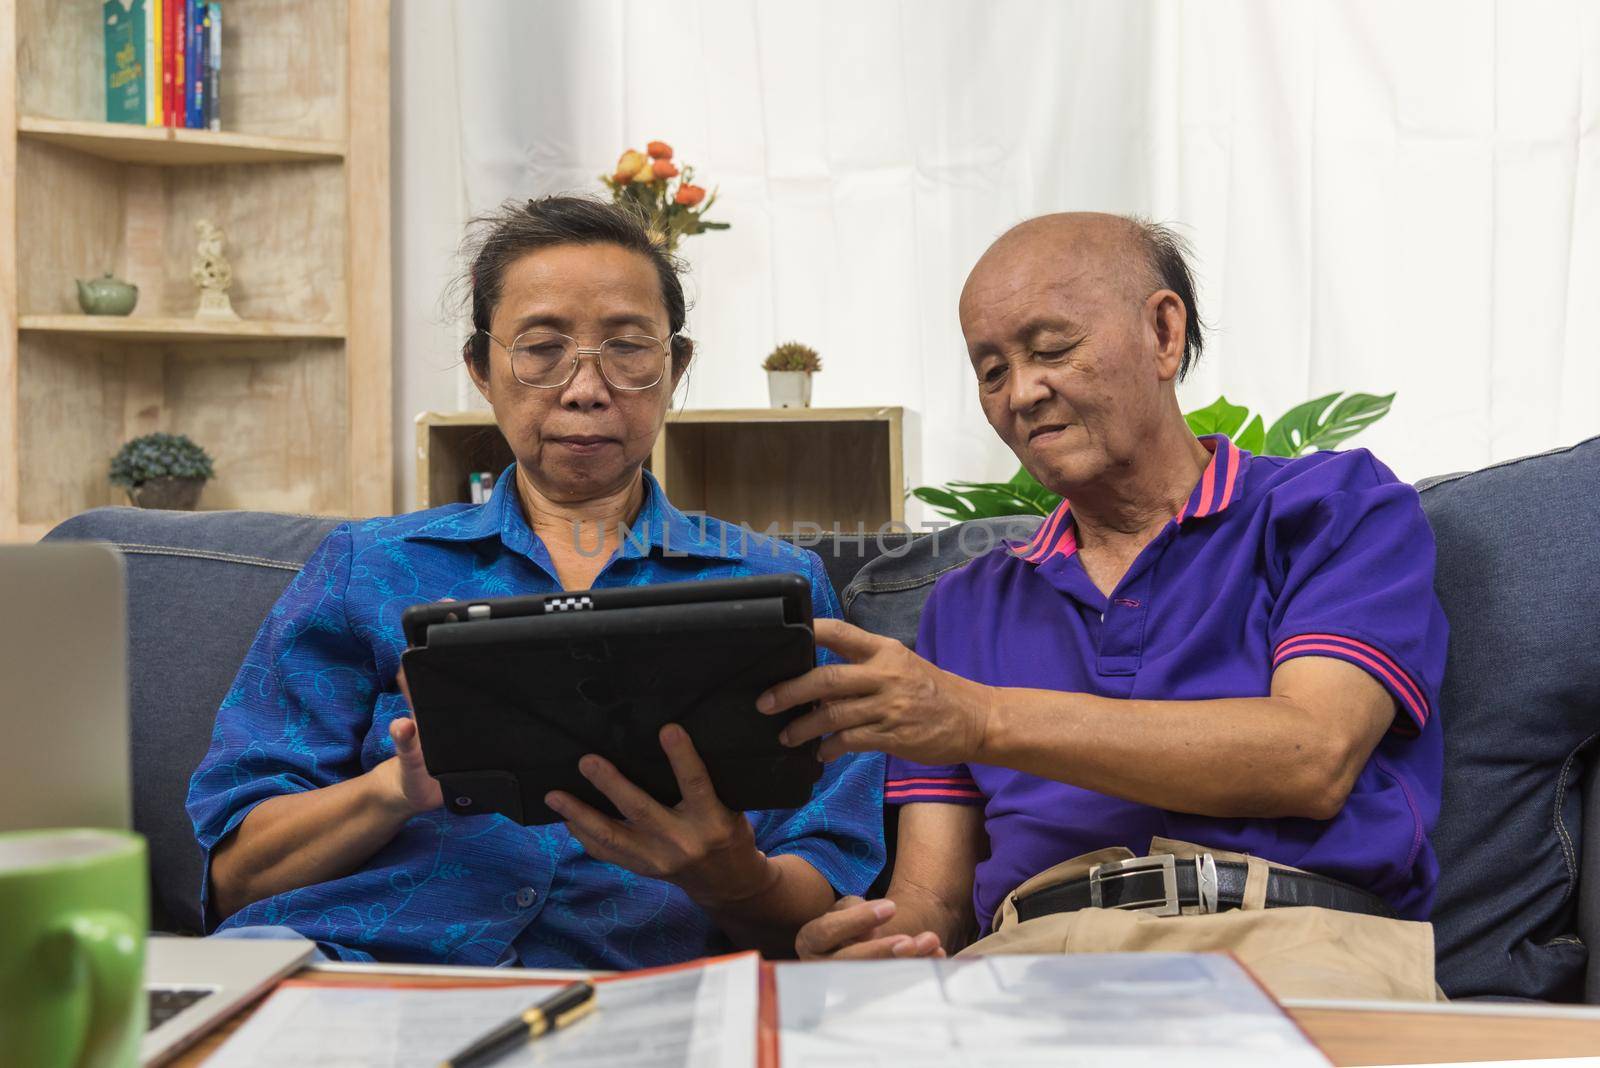 Elderly Asians use tablets and insurance documents at home.